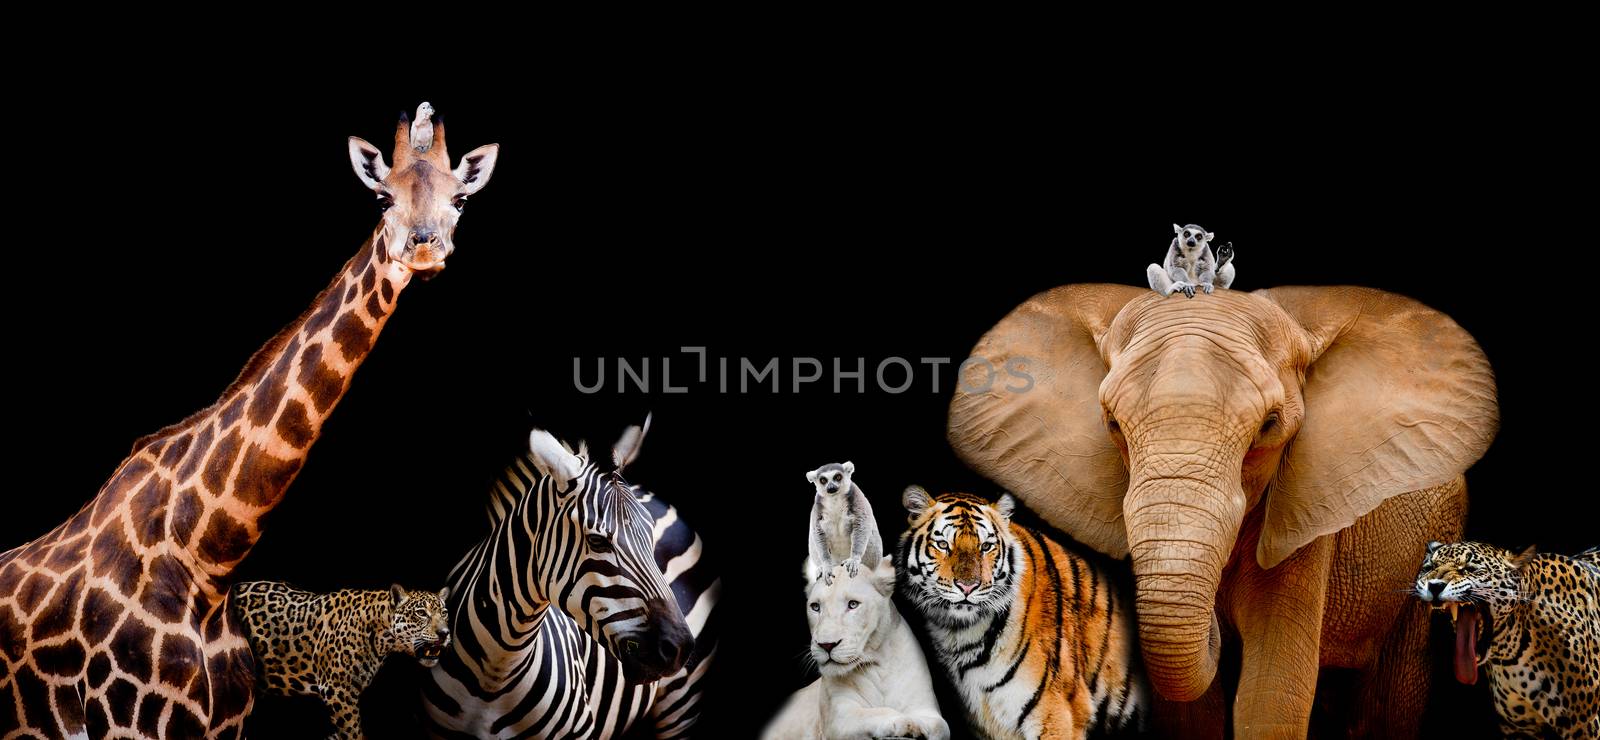 A group of animals are together on a black background with text area. Animals range from an Elephant, Zebra, White Lion, Jaguar, Monkey, Giraffe and Tiger. Use it for a zoo or conservation concept. (And you could find more animals in my portfolio.)